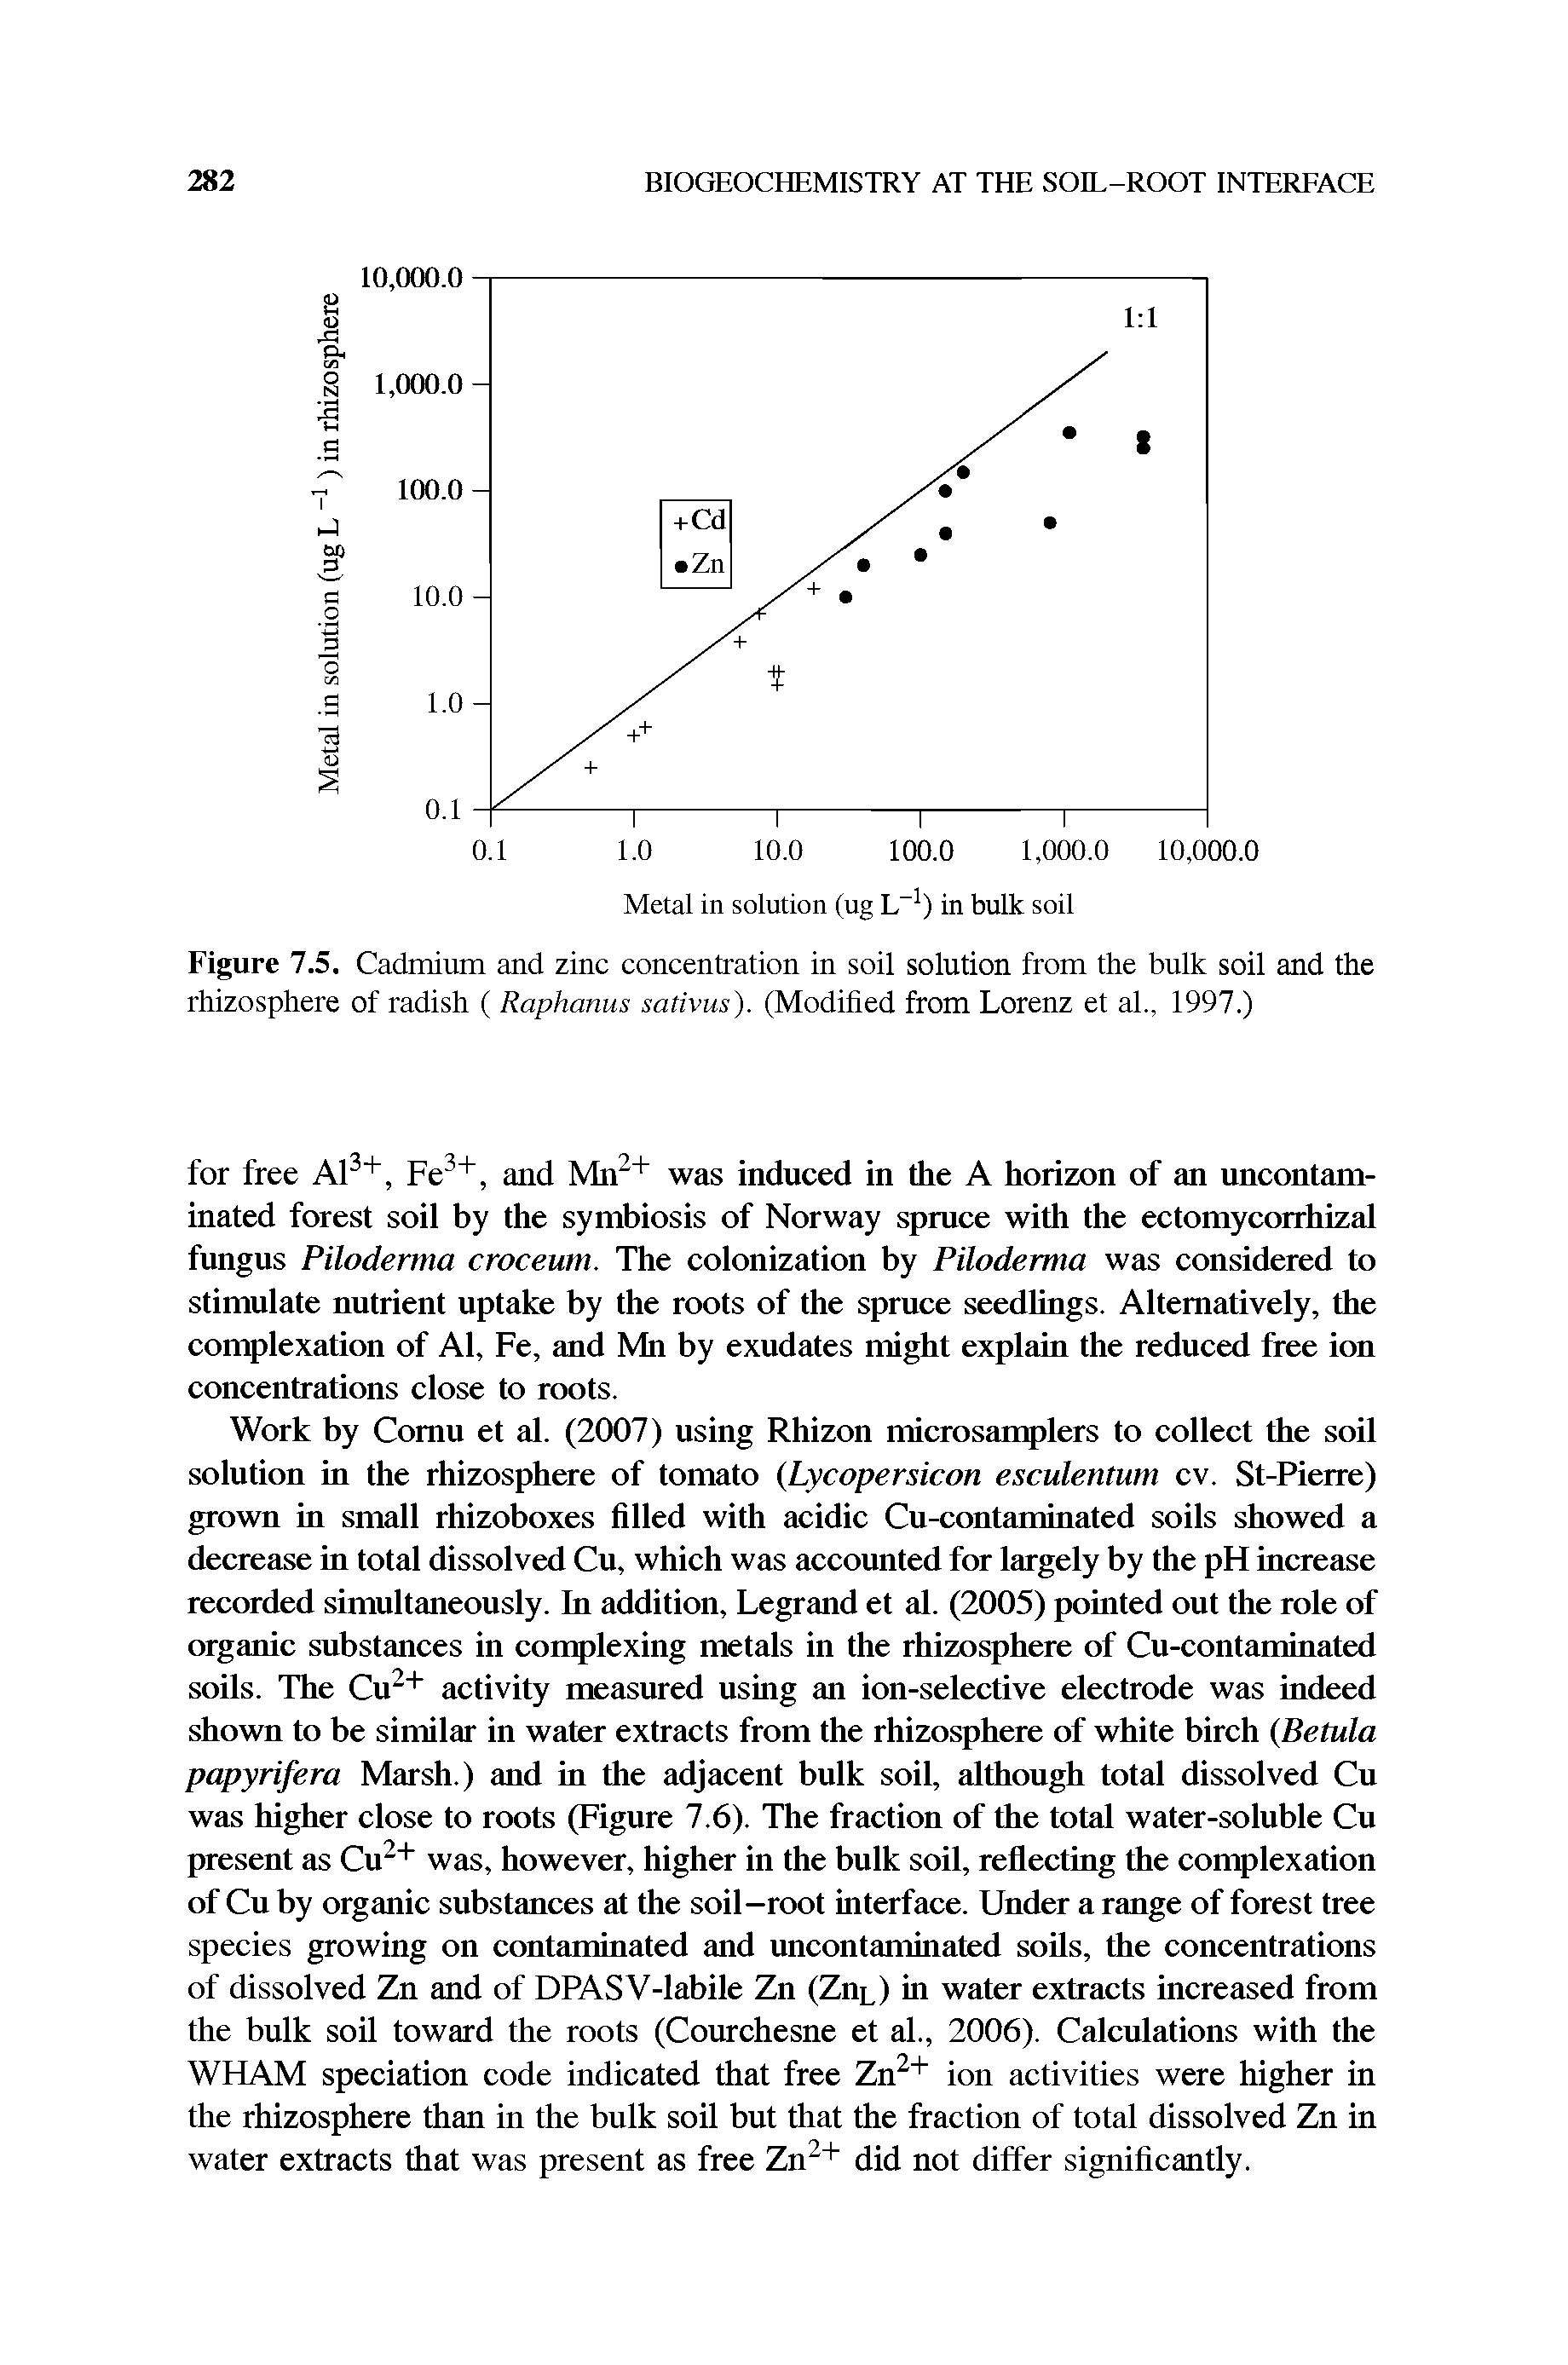 Figure 7.5. Cadmium and zinc concentration in soil solution from the bulk soil and the rhizosphere of radish ( Raphanus sativus). (Modihed from Lorenz et al., 1997.)...